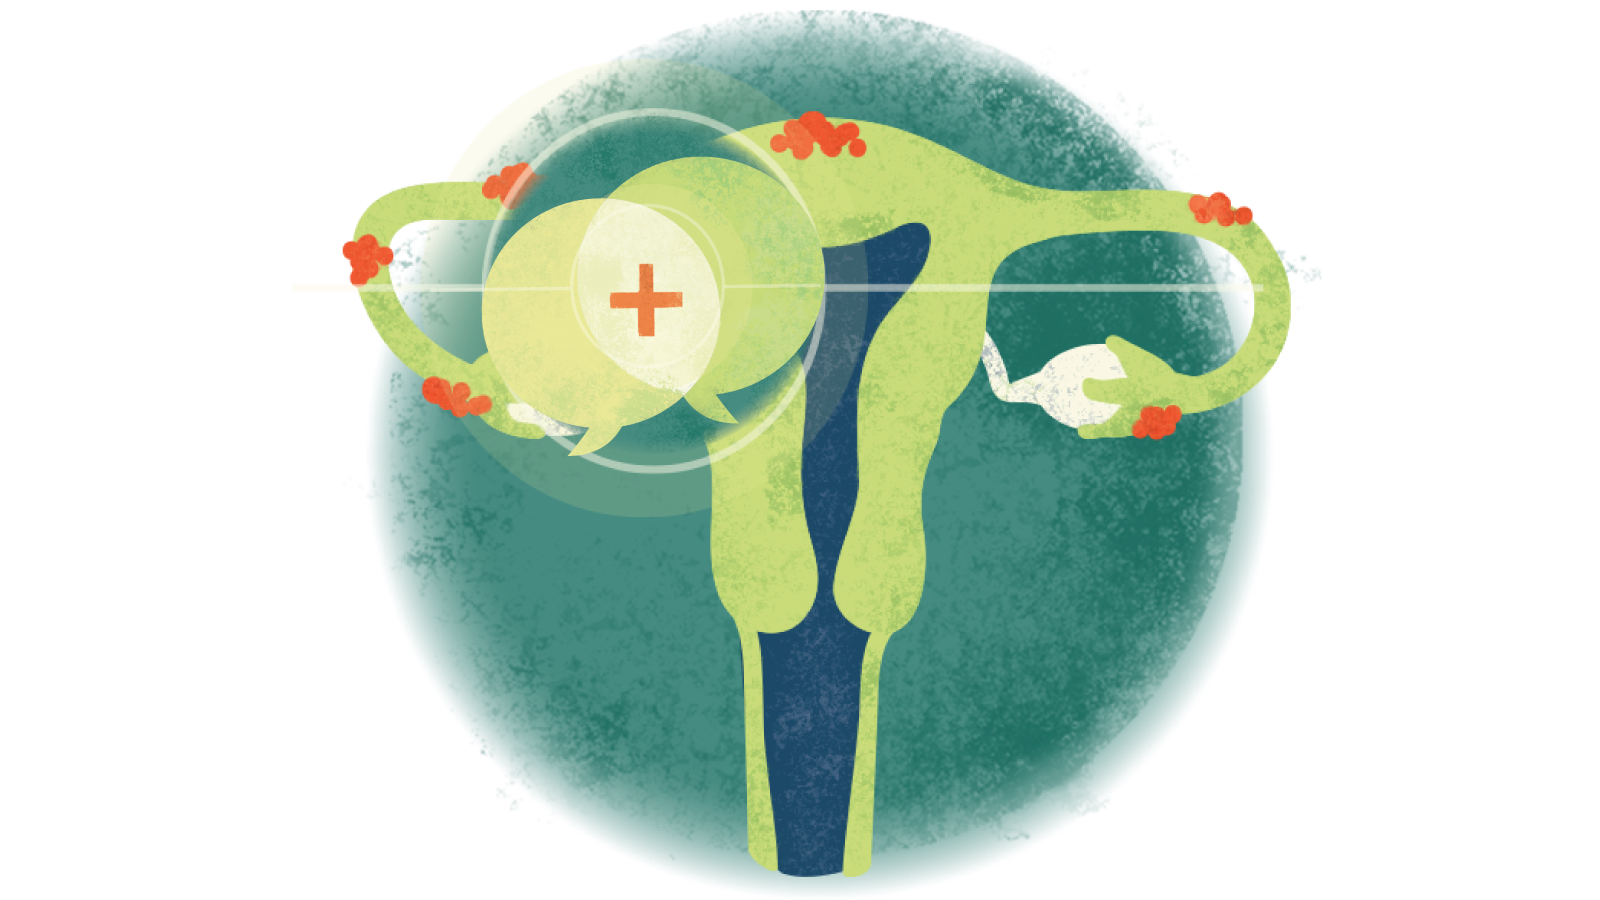 Illustration of two talking bubbles with a plus sign in the middle of them over a uterus with endometriosis